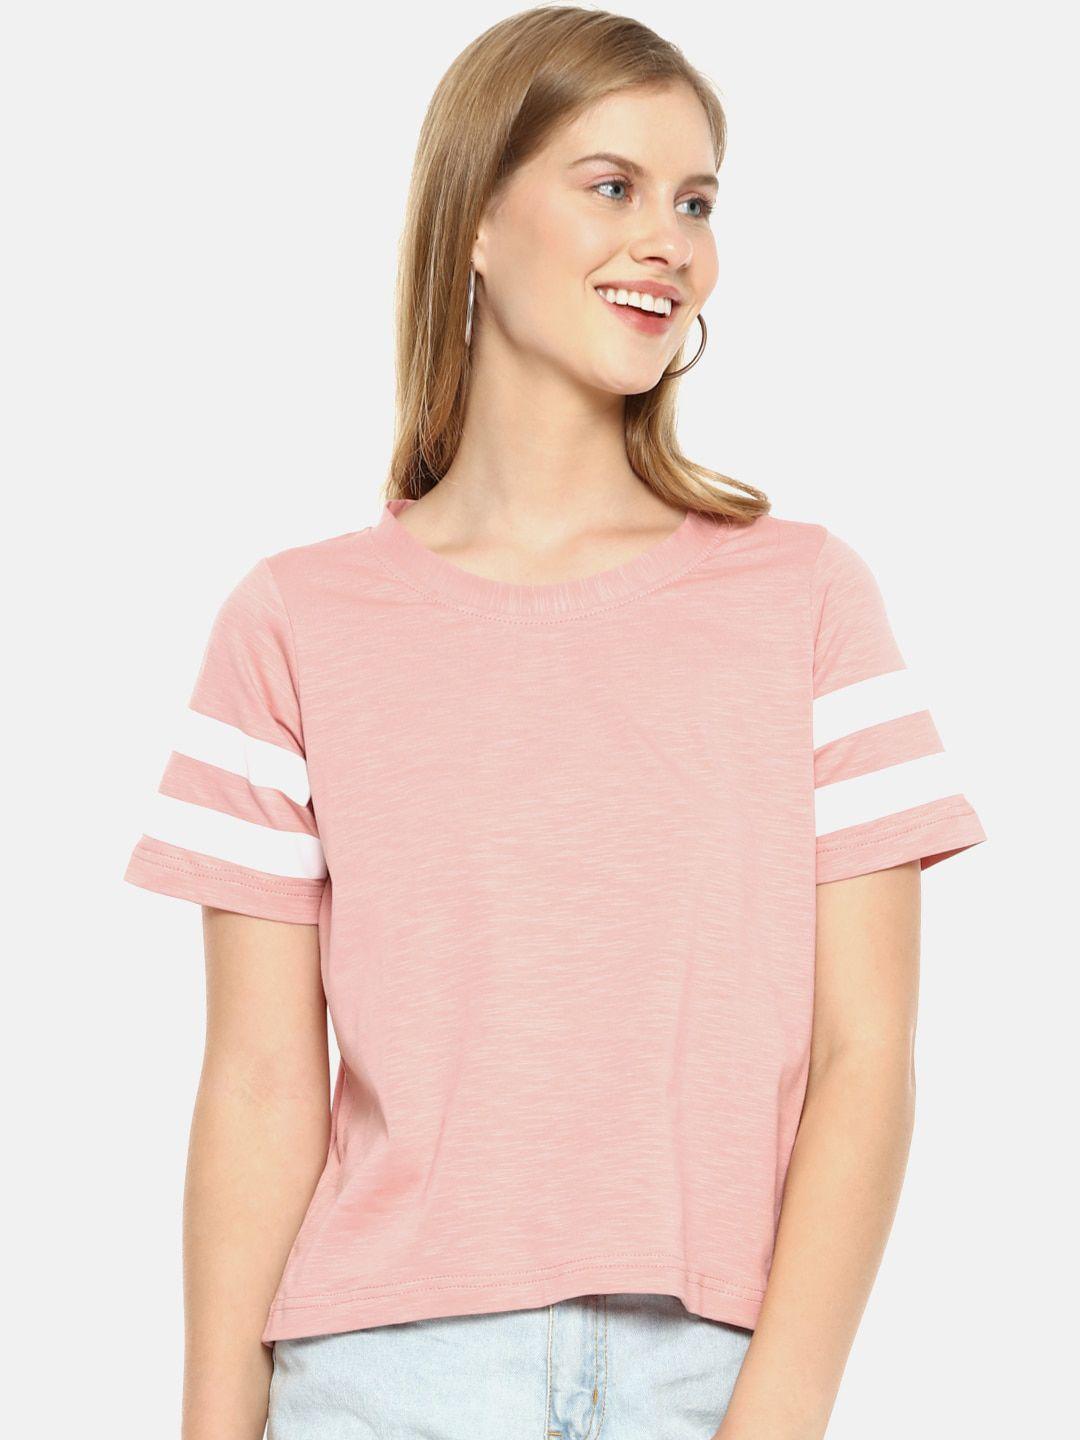 campus sutra pink striped pure cotton regular top